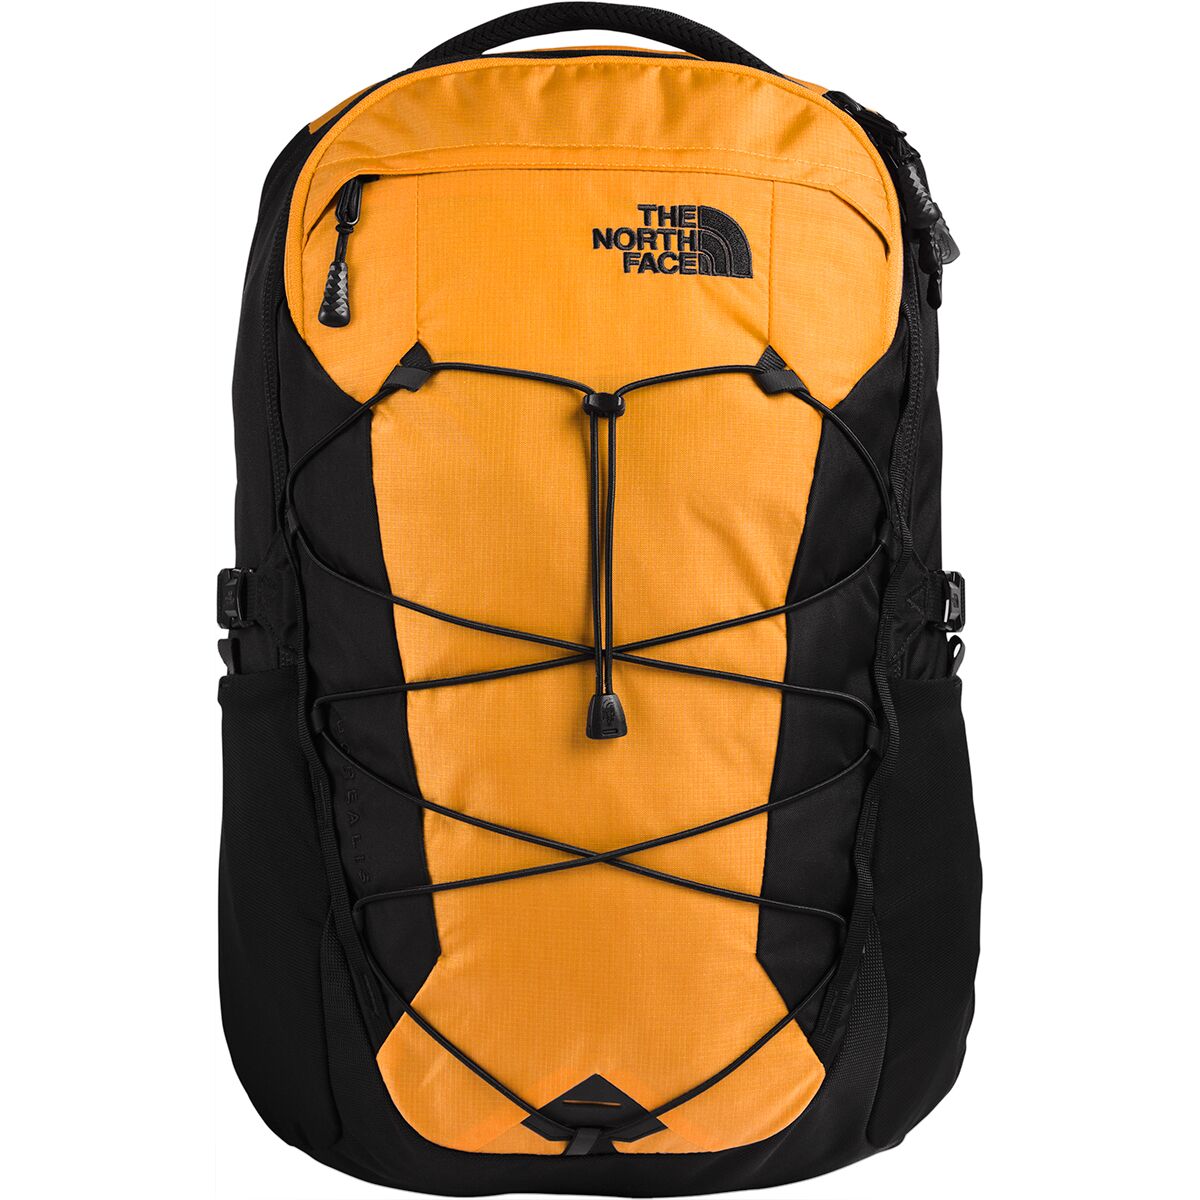 The North Face Borealis 28L Backpack - Accessories